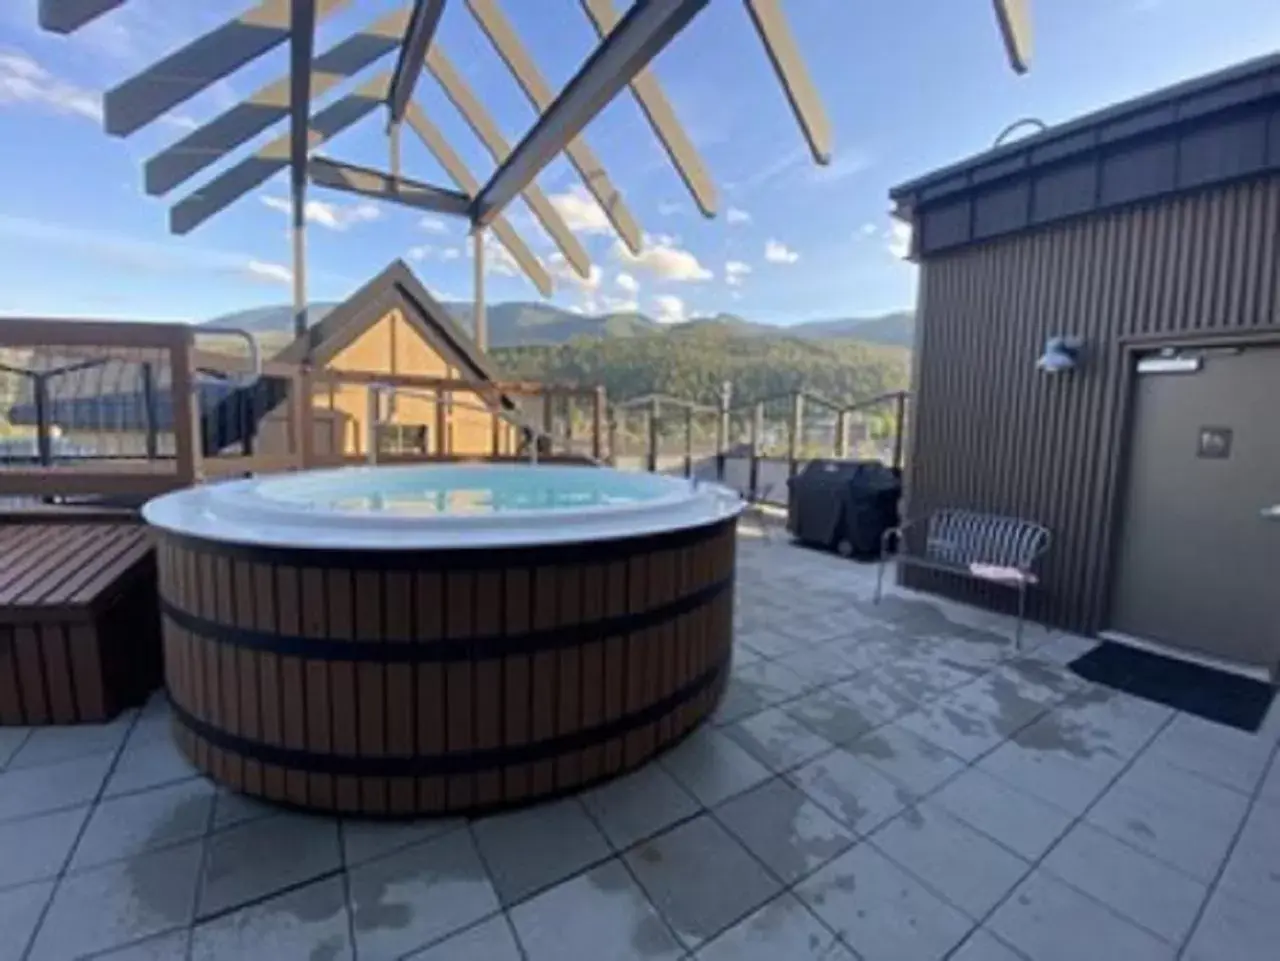 Hot Tub in Morning Star Lodge - Hosted by Linda